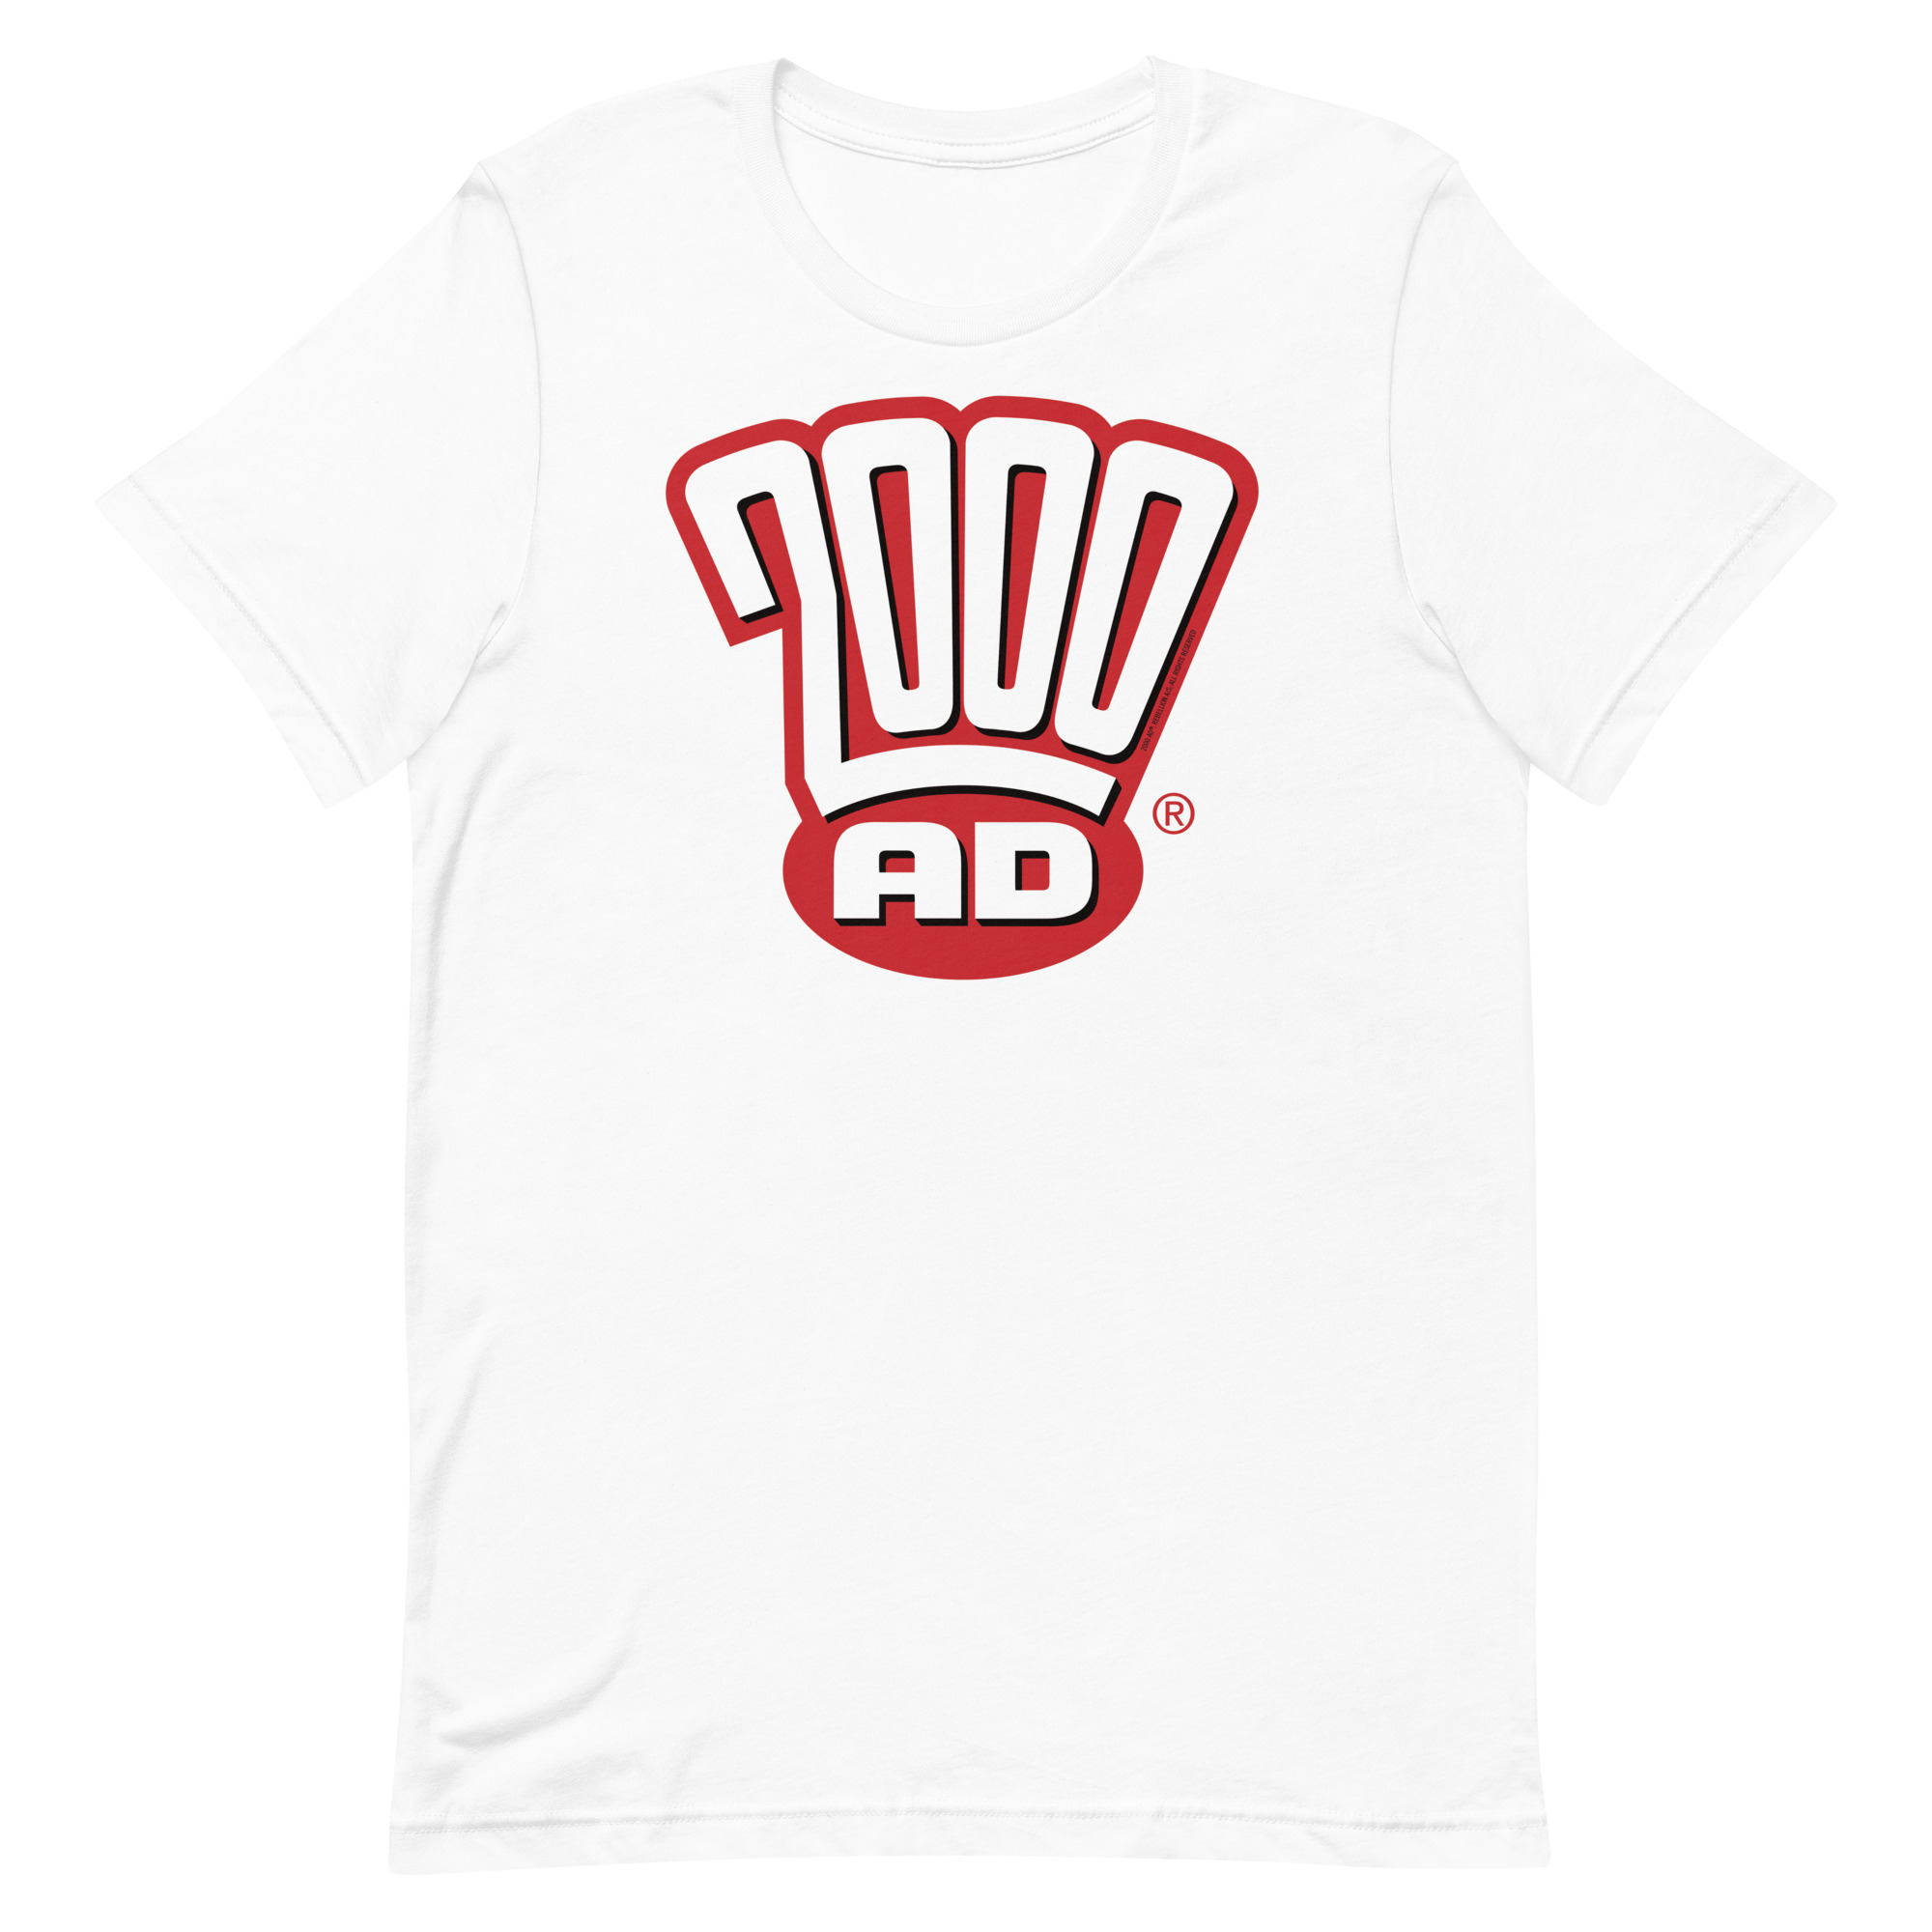 Image of a White coloured 2000AD - The Modern Era t-shirt featuring a large 2000AD - The Modern Era logo in the middle